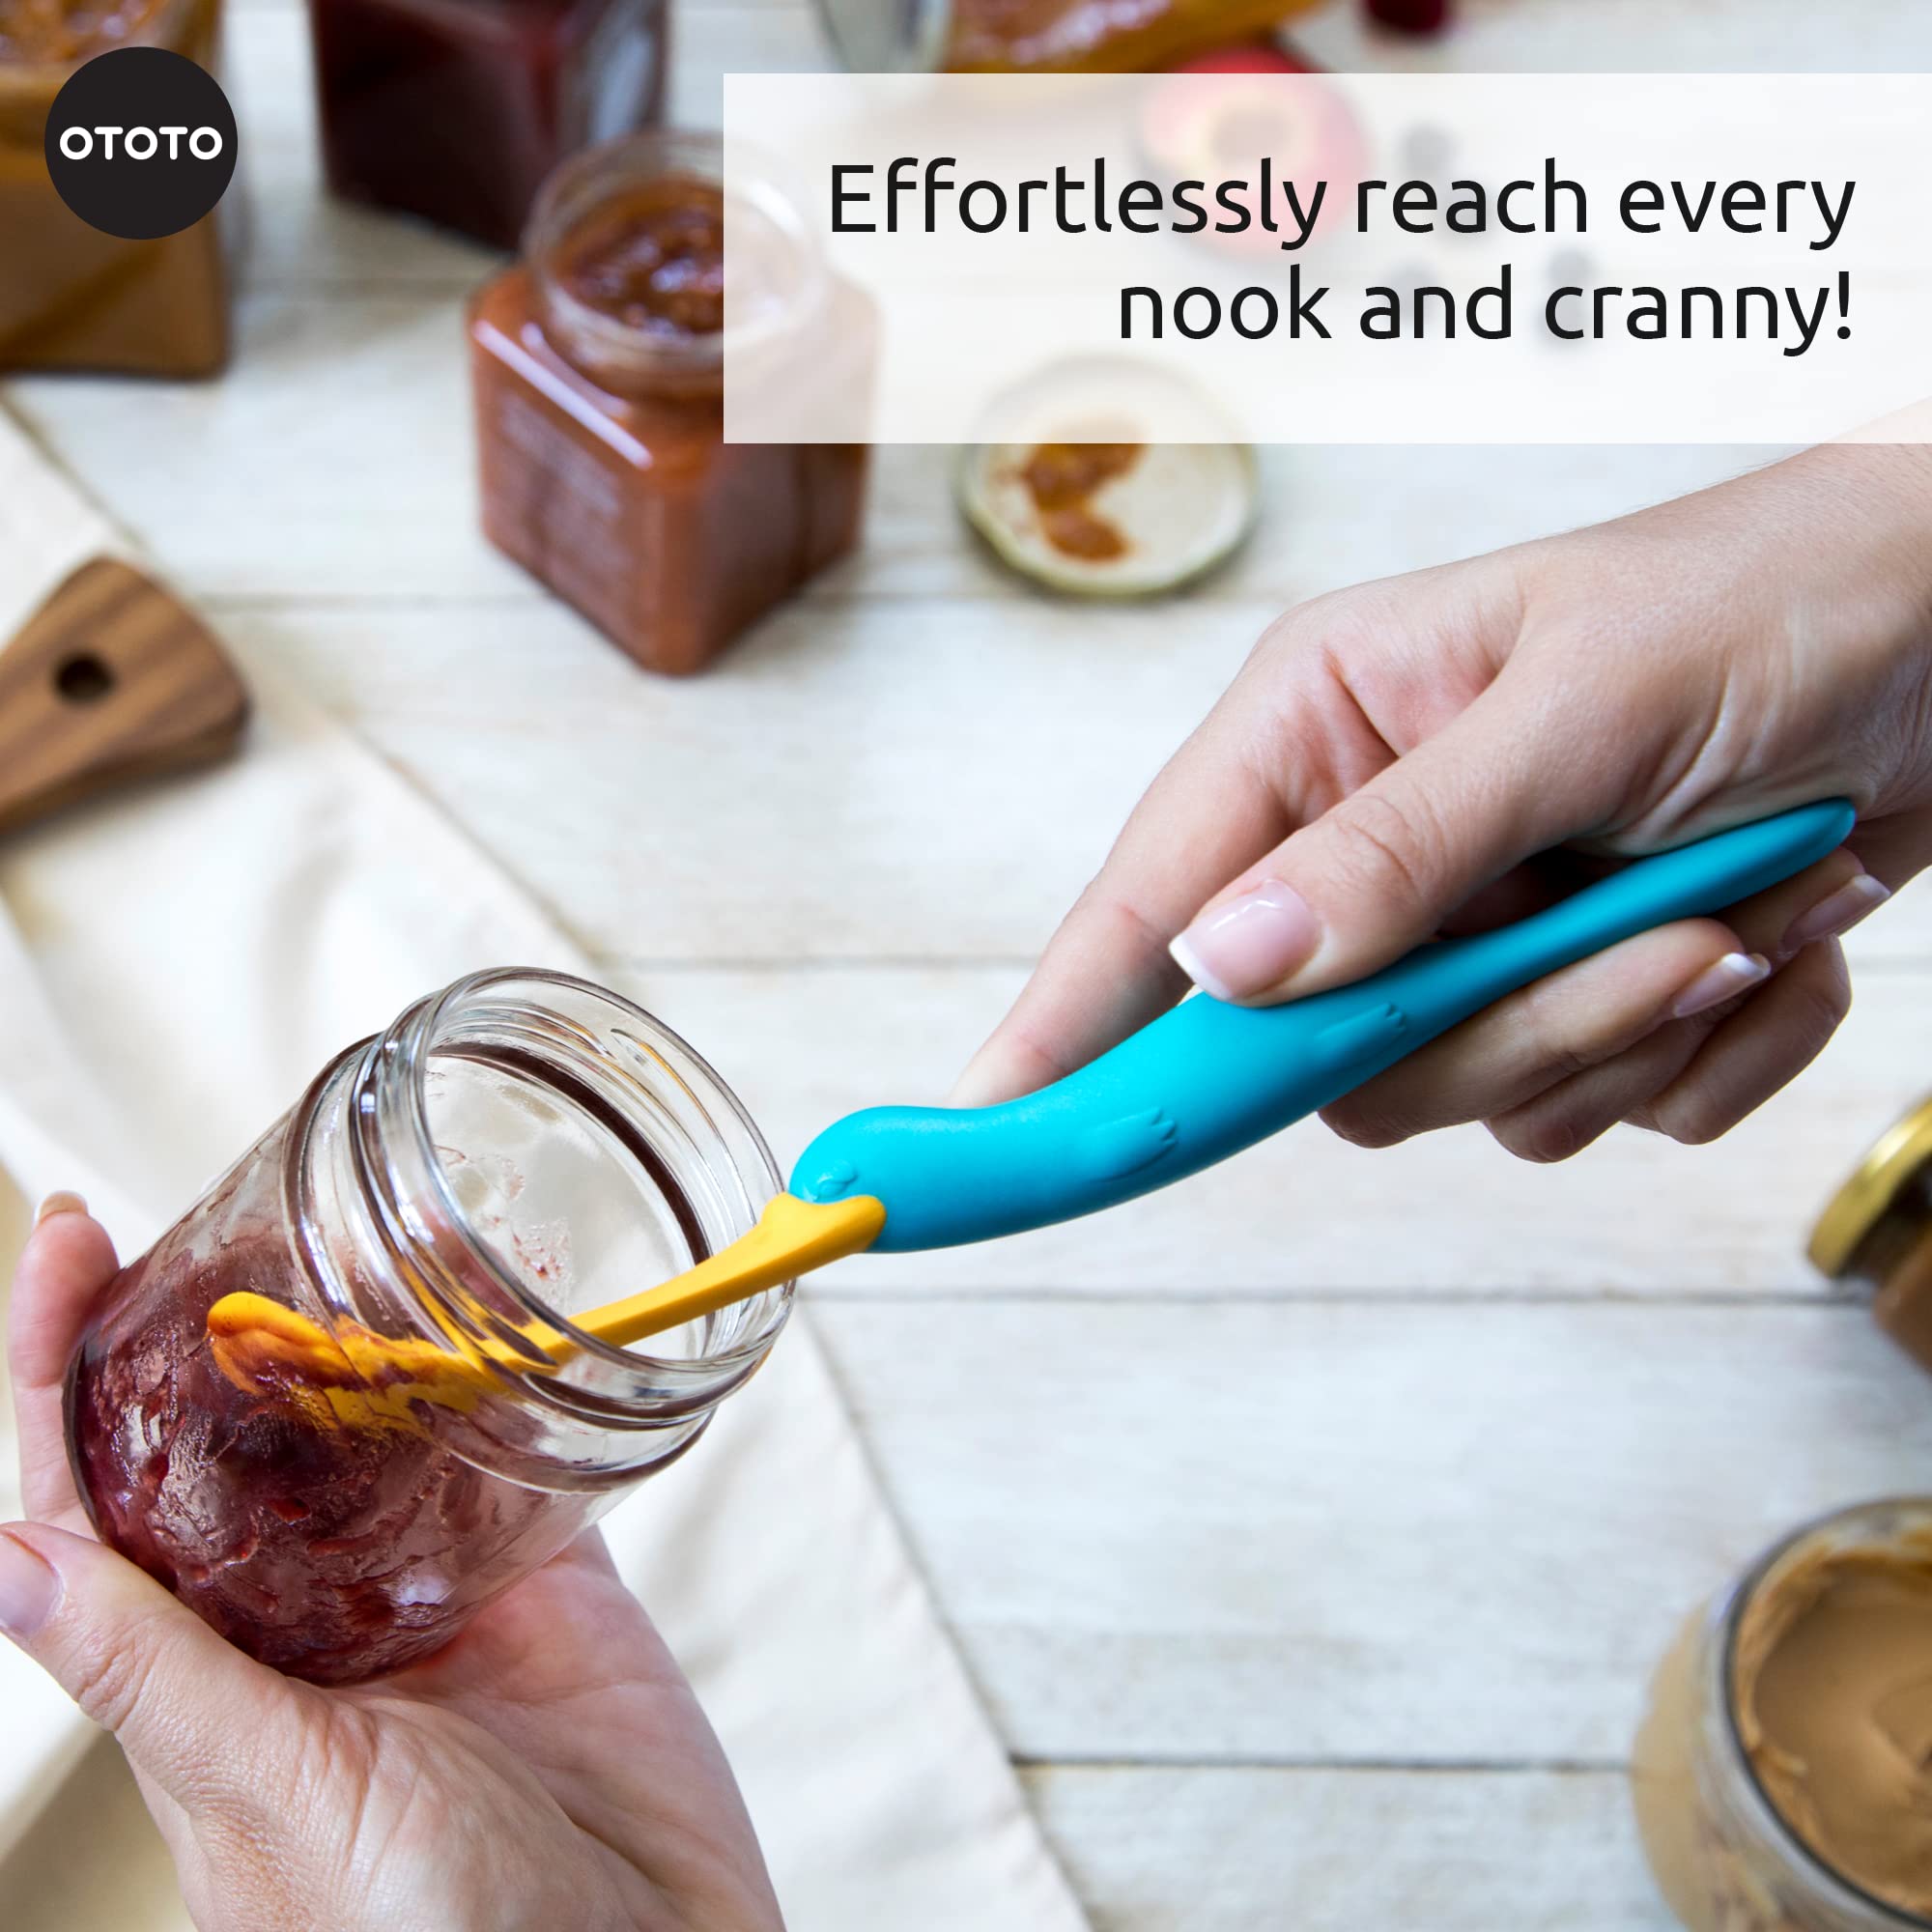 OTOTO Splatypus Jar Spatula for Scooping and Scraping - Unique Fun Cooking Kitchen Gadgets for Foodies - BPA-free & 100% Food Safe - Crepe Spreader $7.99